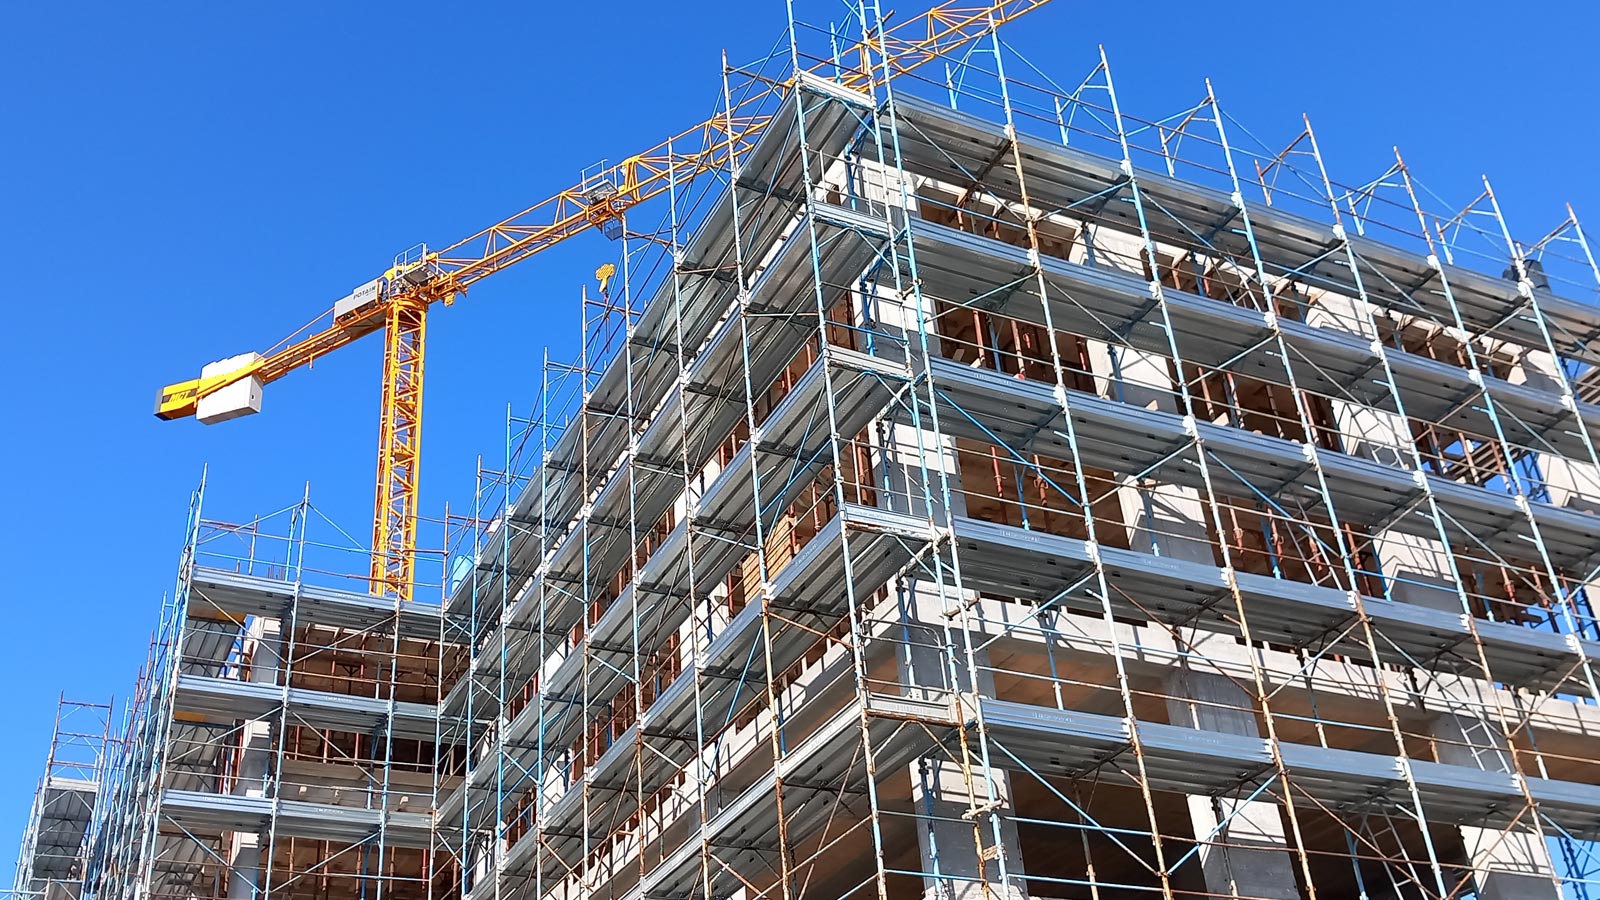 Scaffolding and cranes used in construction sites in Italy